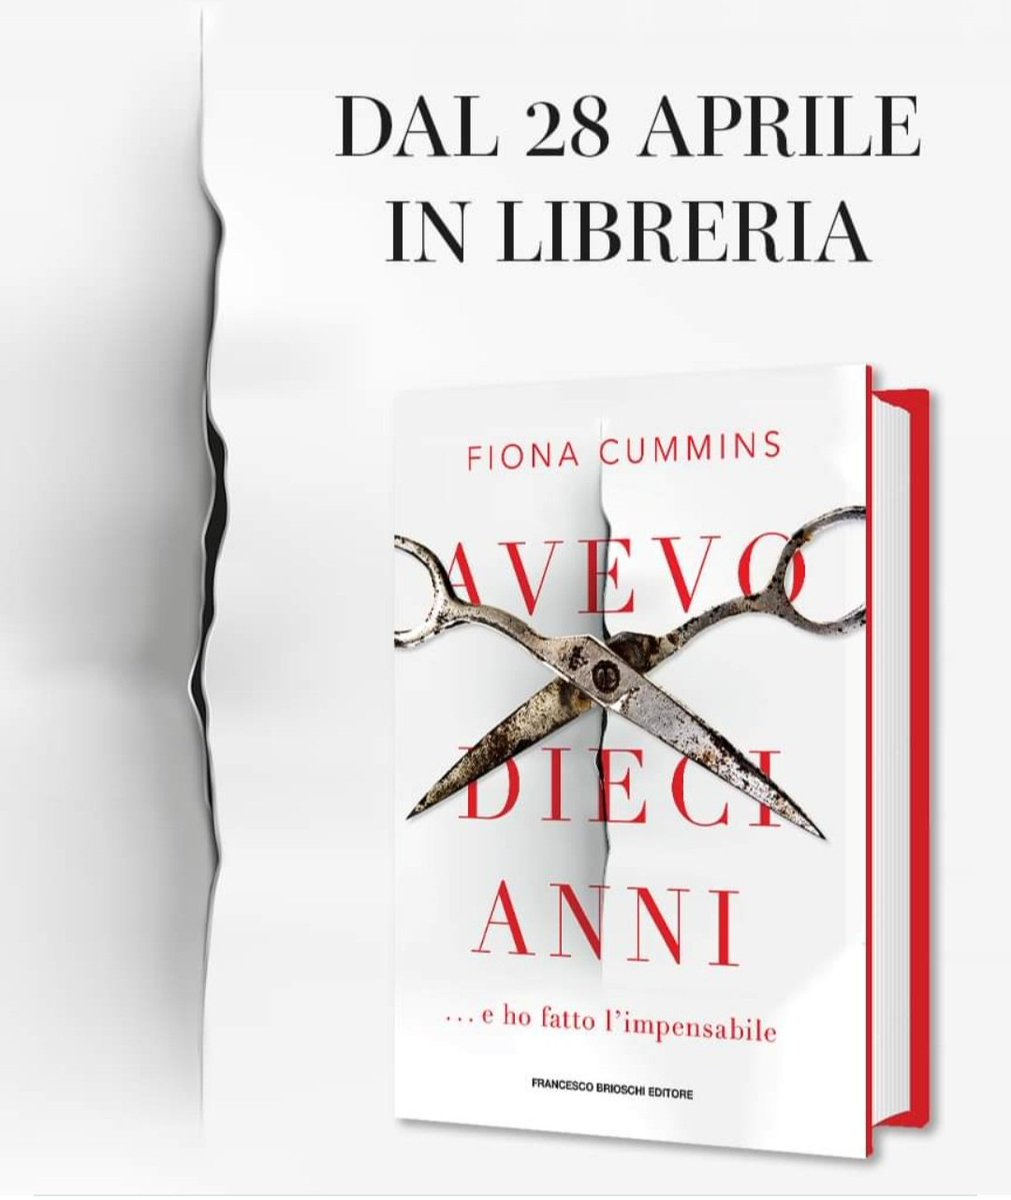 Avevo Dieci Anni is published in Italy today. Should I have pizza for tea to celebrate? #WhenIWasTen✂️🇮🇹